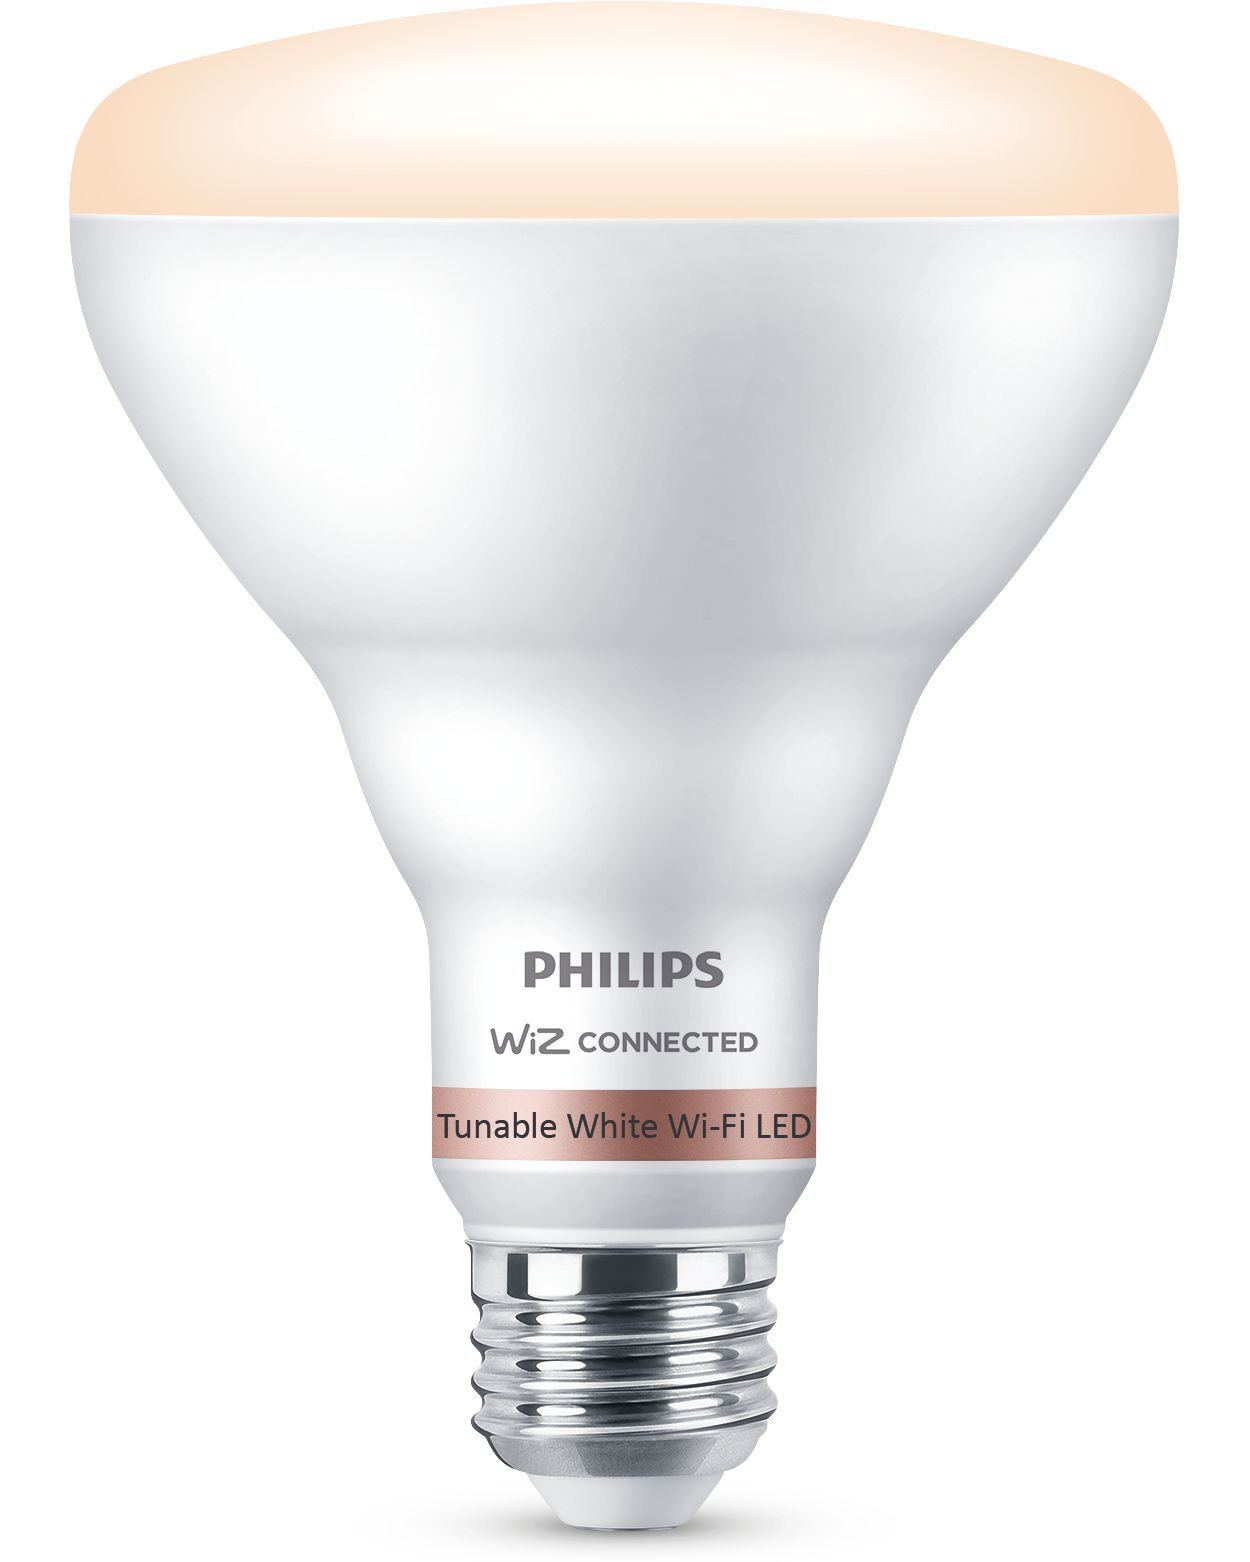 Easy-to-use smart tunable white bulb